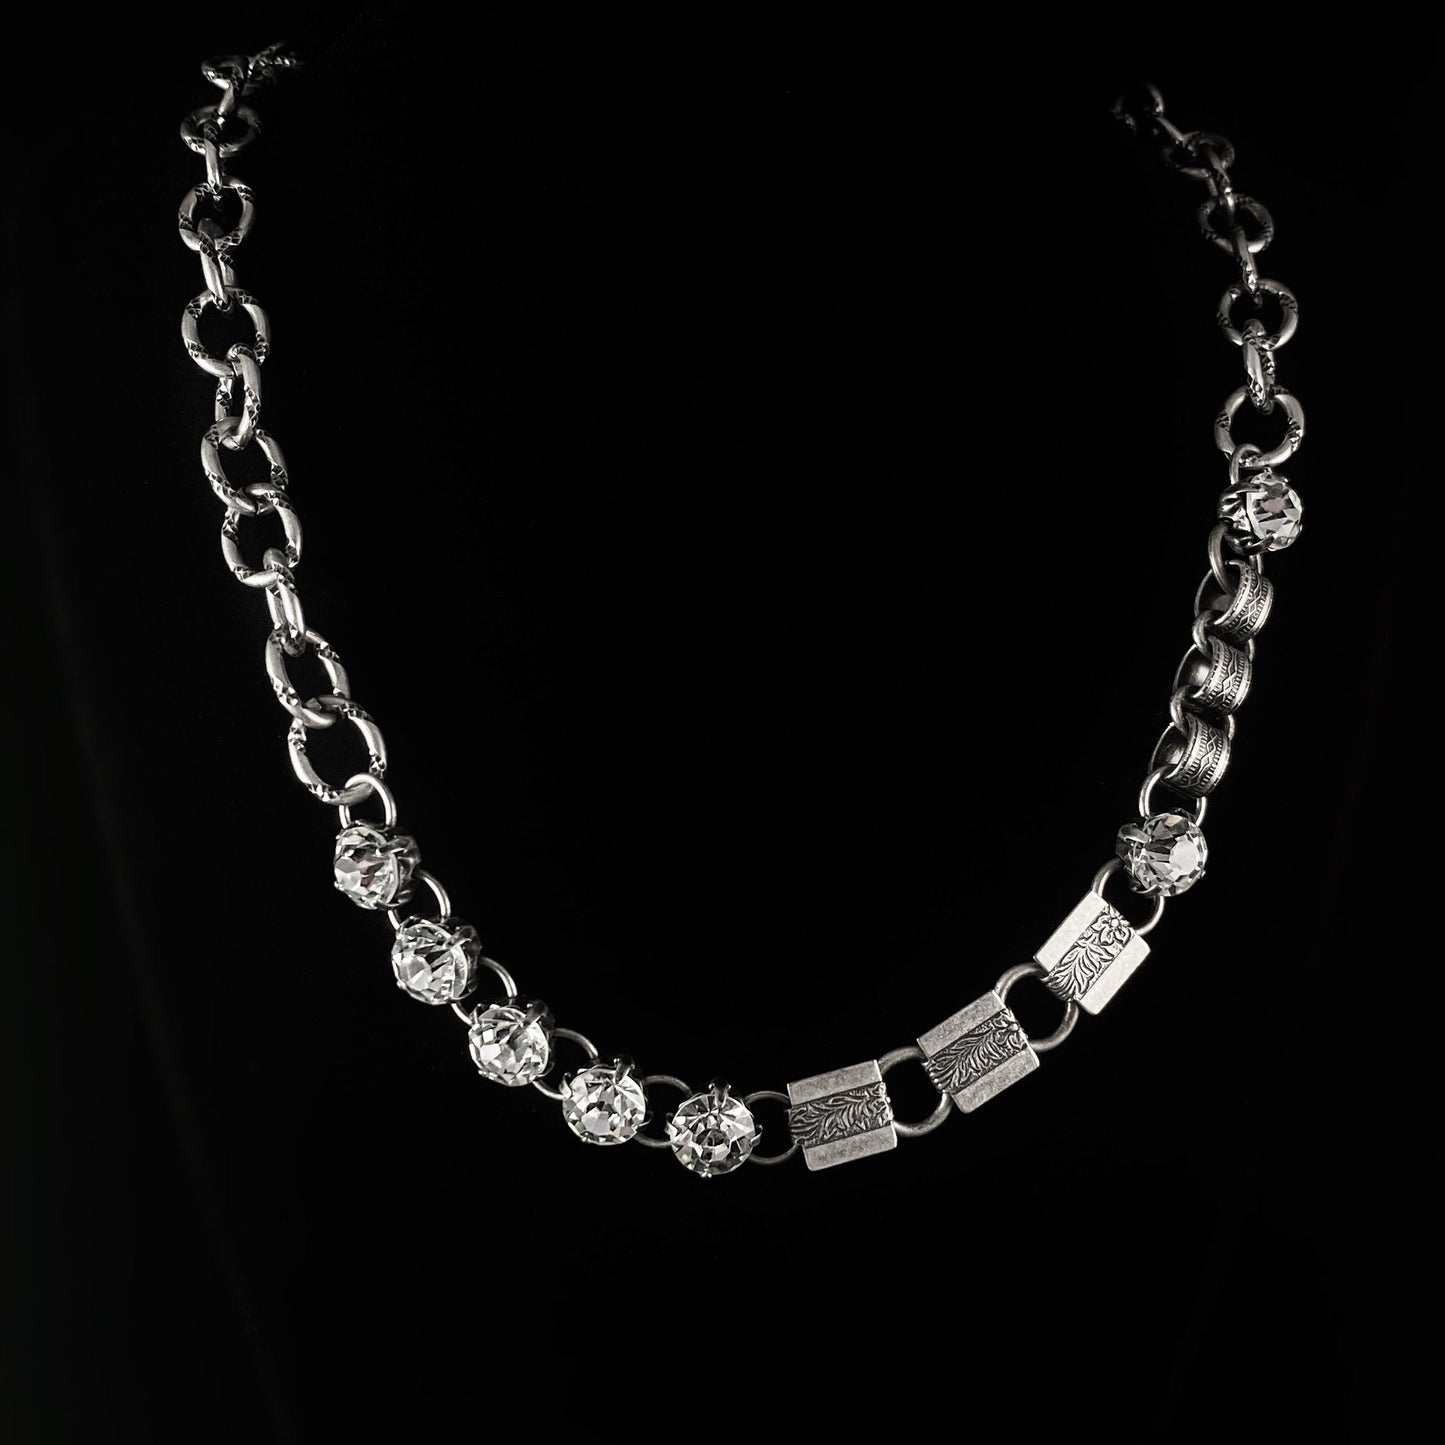 Burnished Silver Link and Chain Clear Swarovski Crystal Necklace - VBC